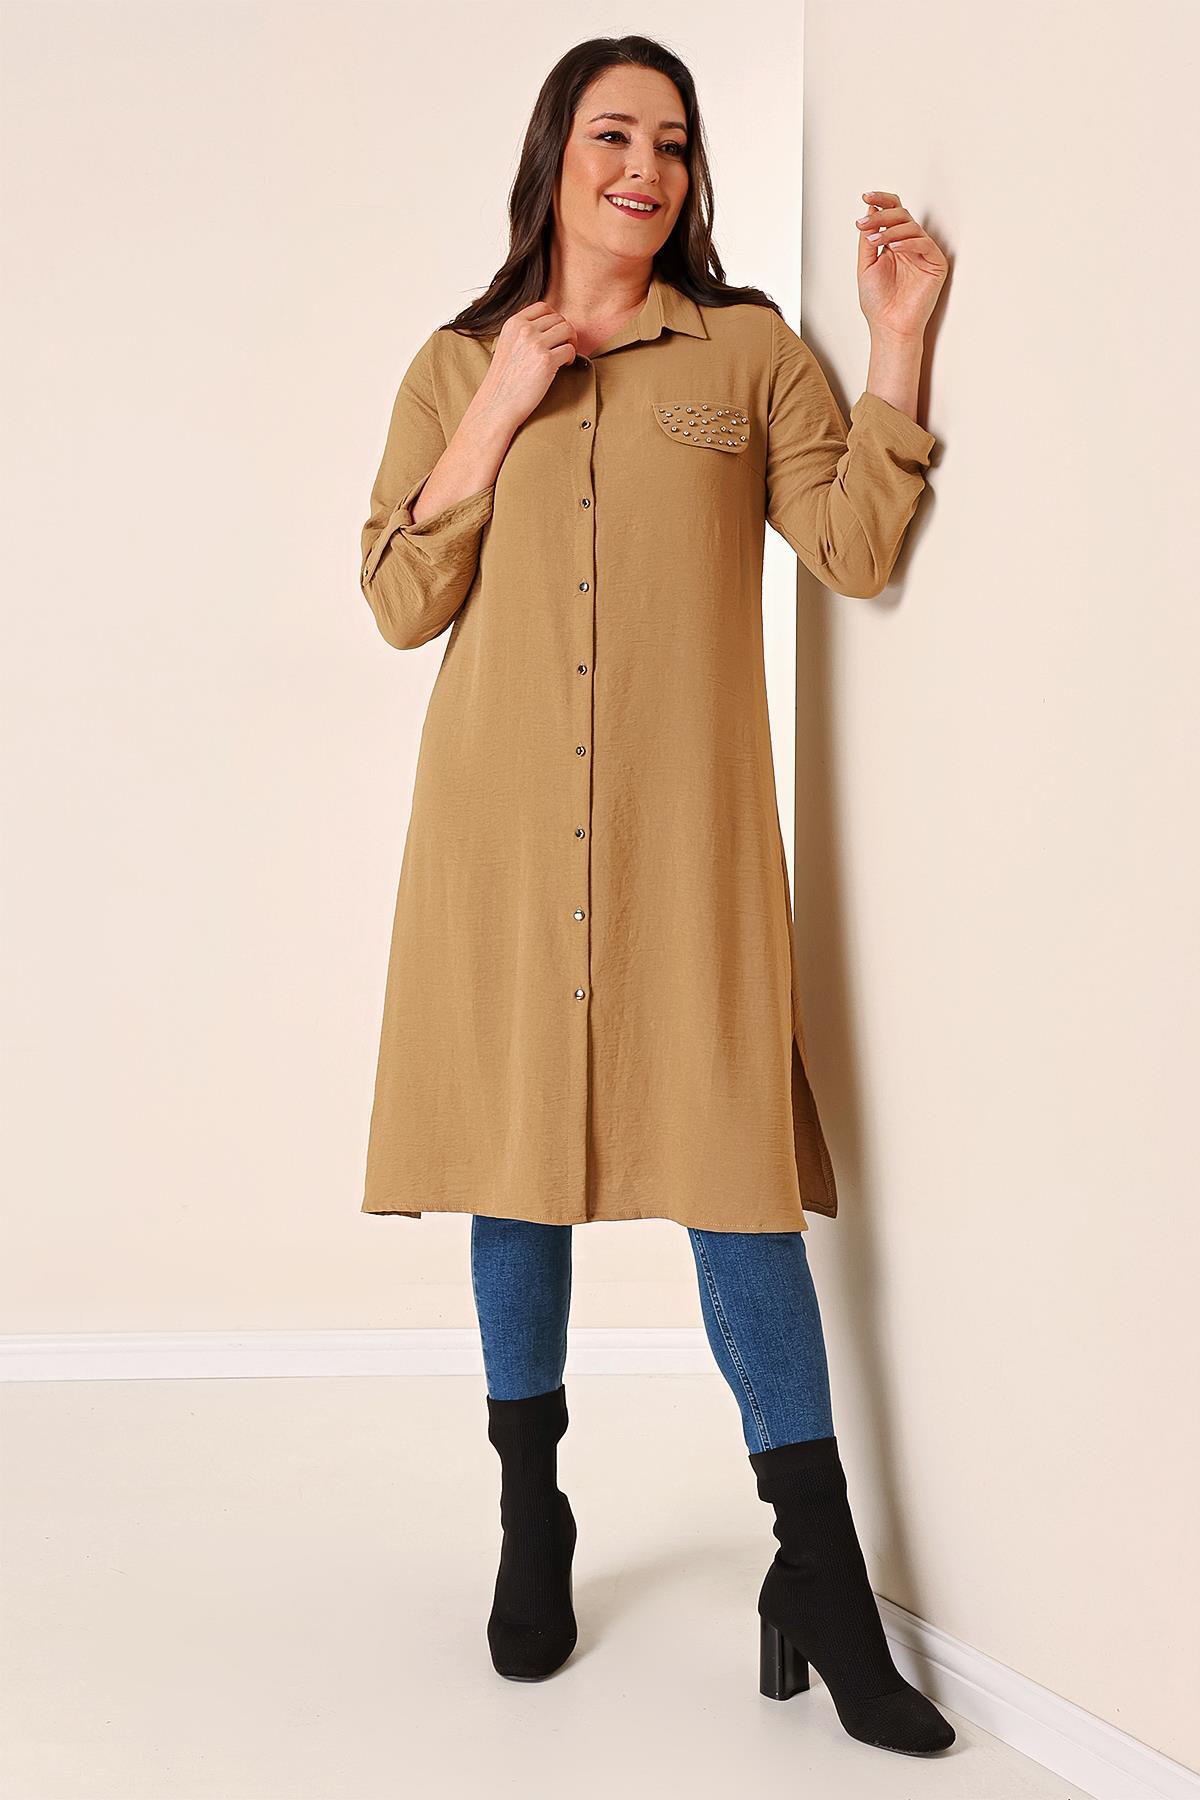 Levně By Saygı Front Buttoned Three Quarter Sleeve Pearl Detailed Plus Size Ayrobin Long Tunic